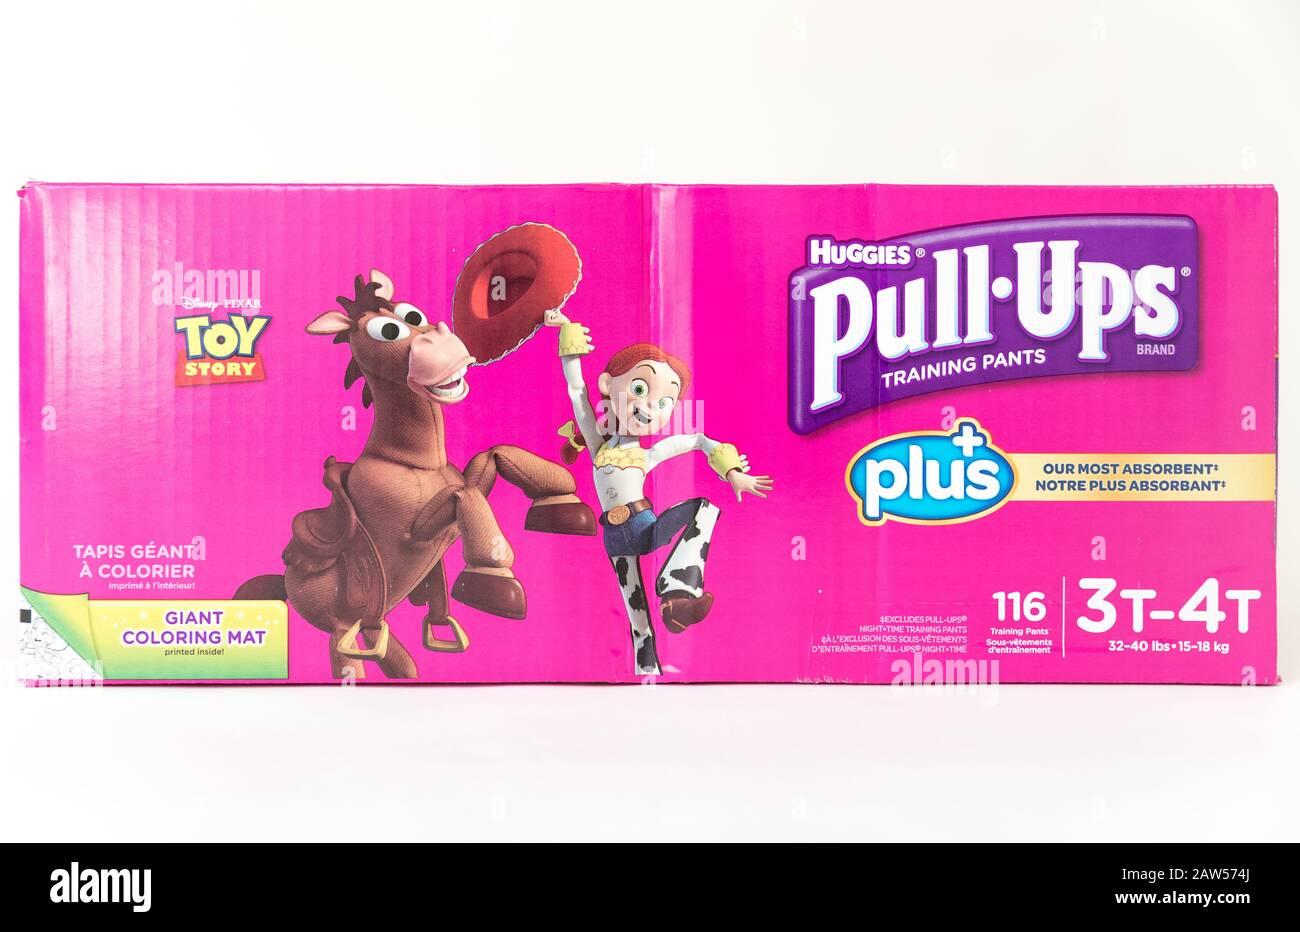 Huggies Pull-Ups® Learning Designs® for Girls Training Pants, 3T to 4T –  Medical Supply HQ